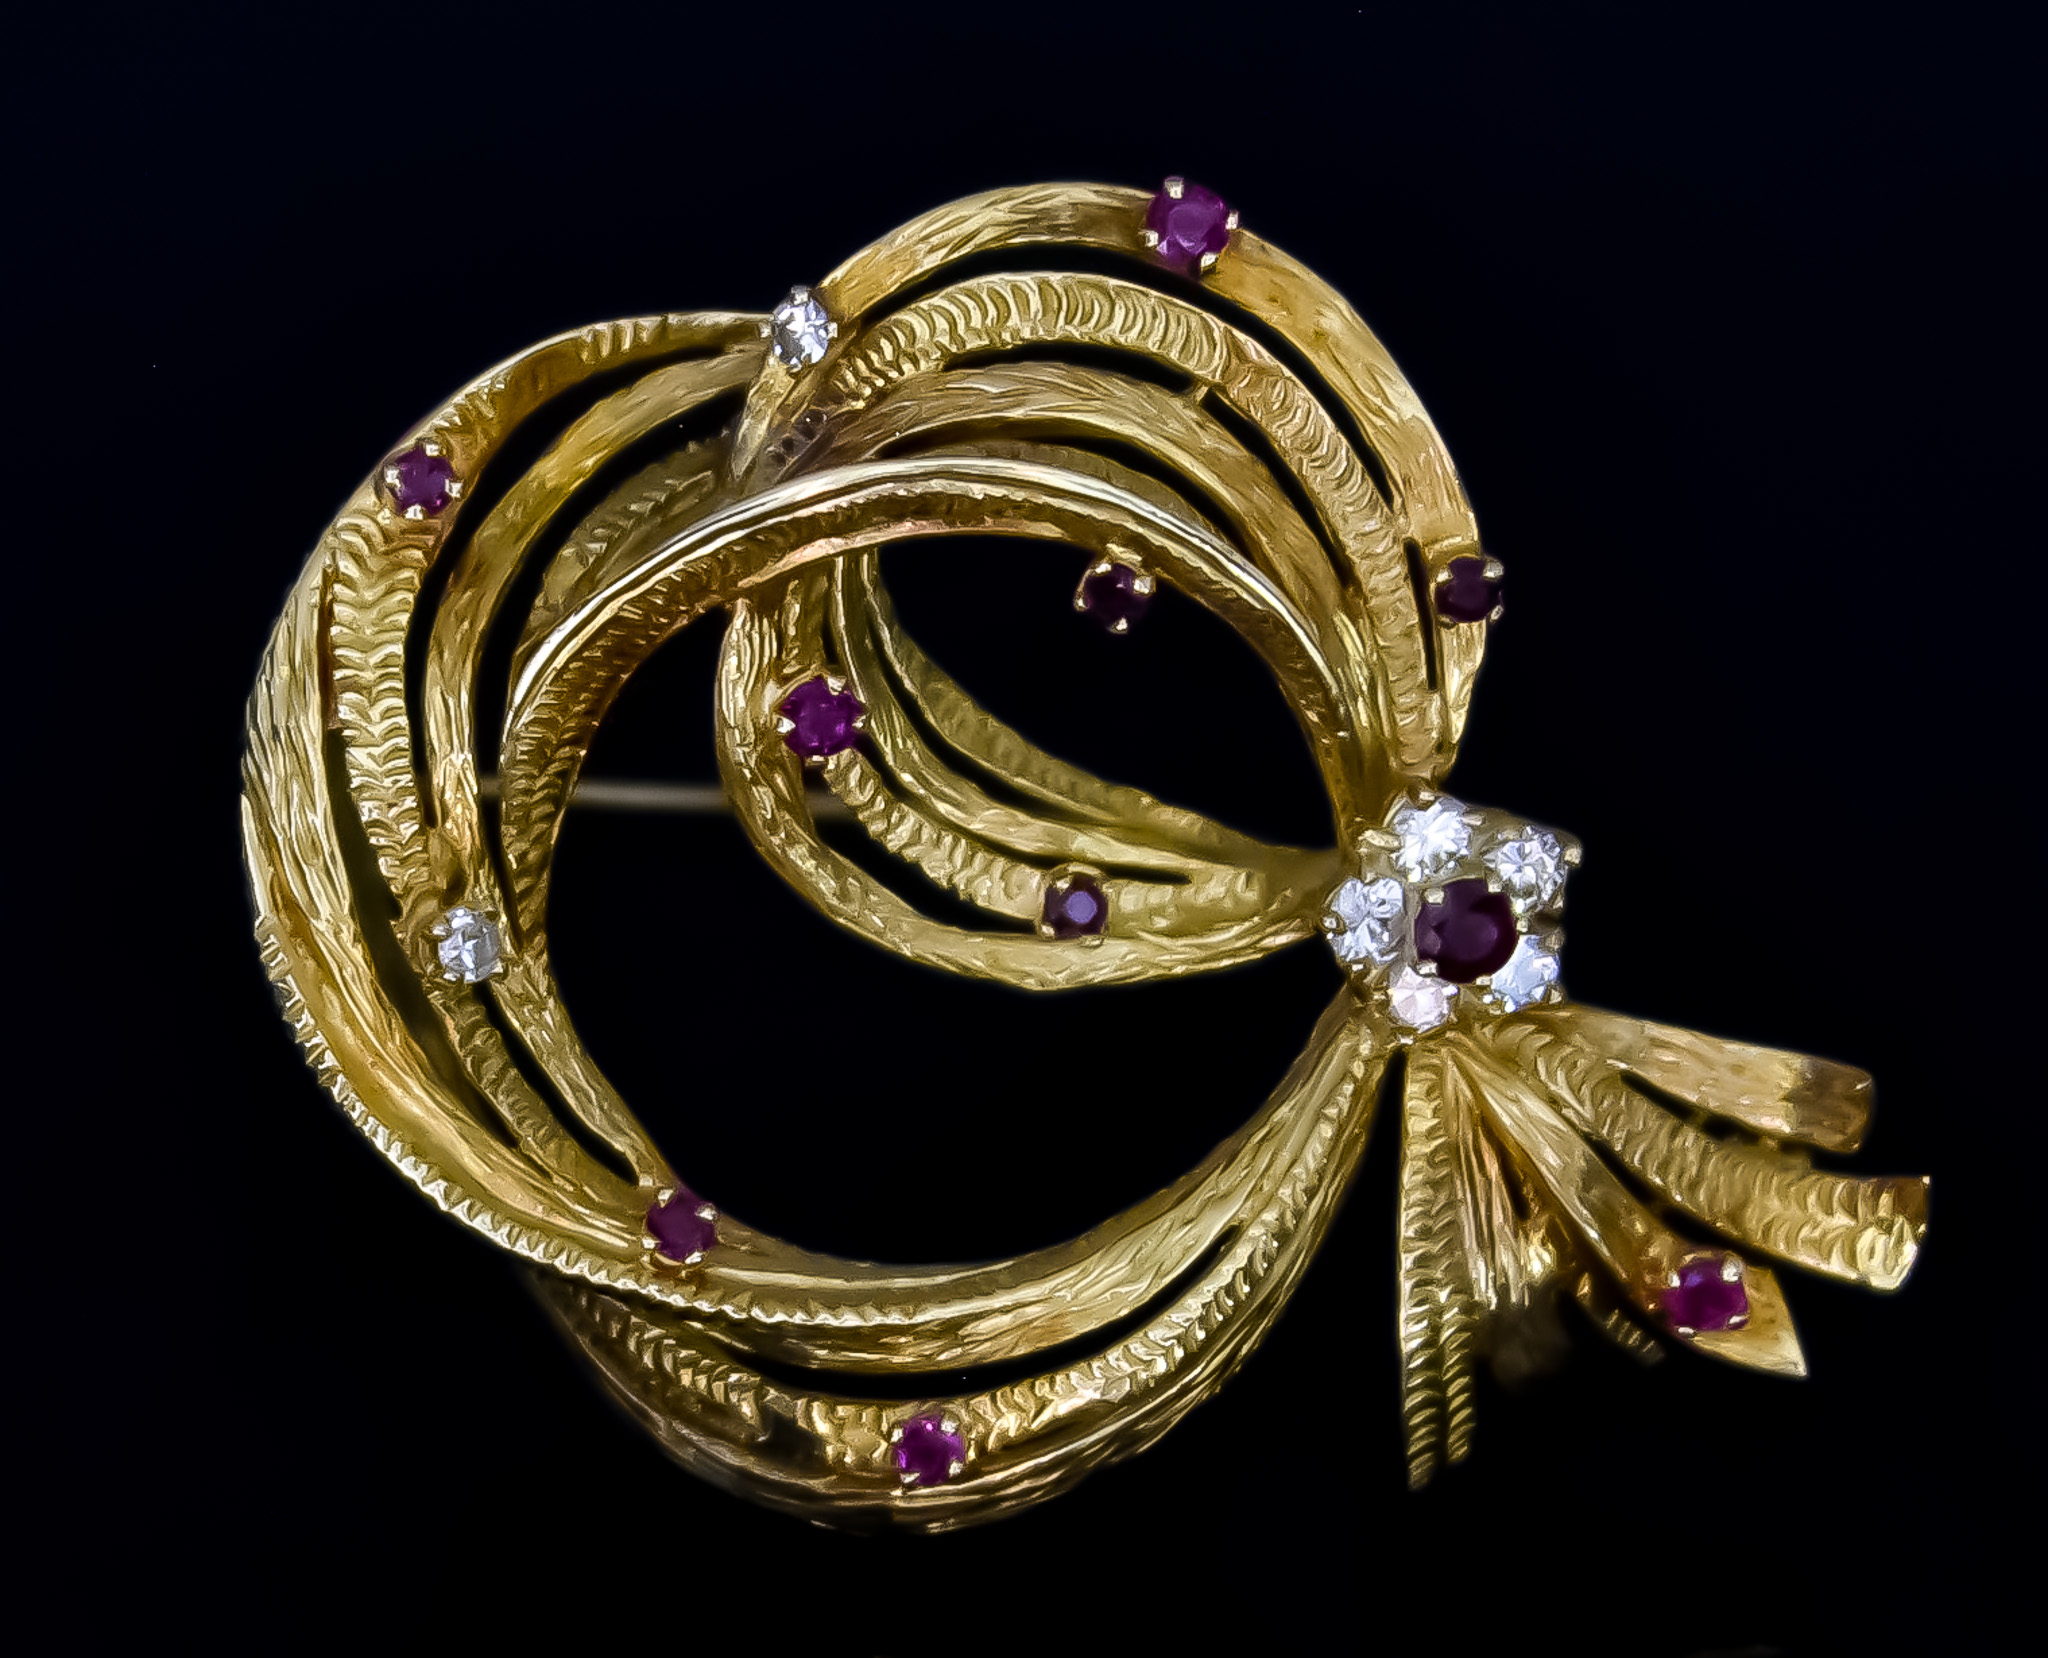 A Diamond and Ruby Brooch, 20th Century, set with small ruby stone and small brilliant cut white